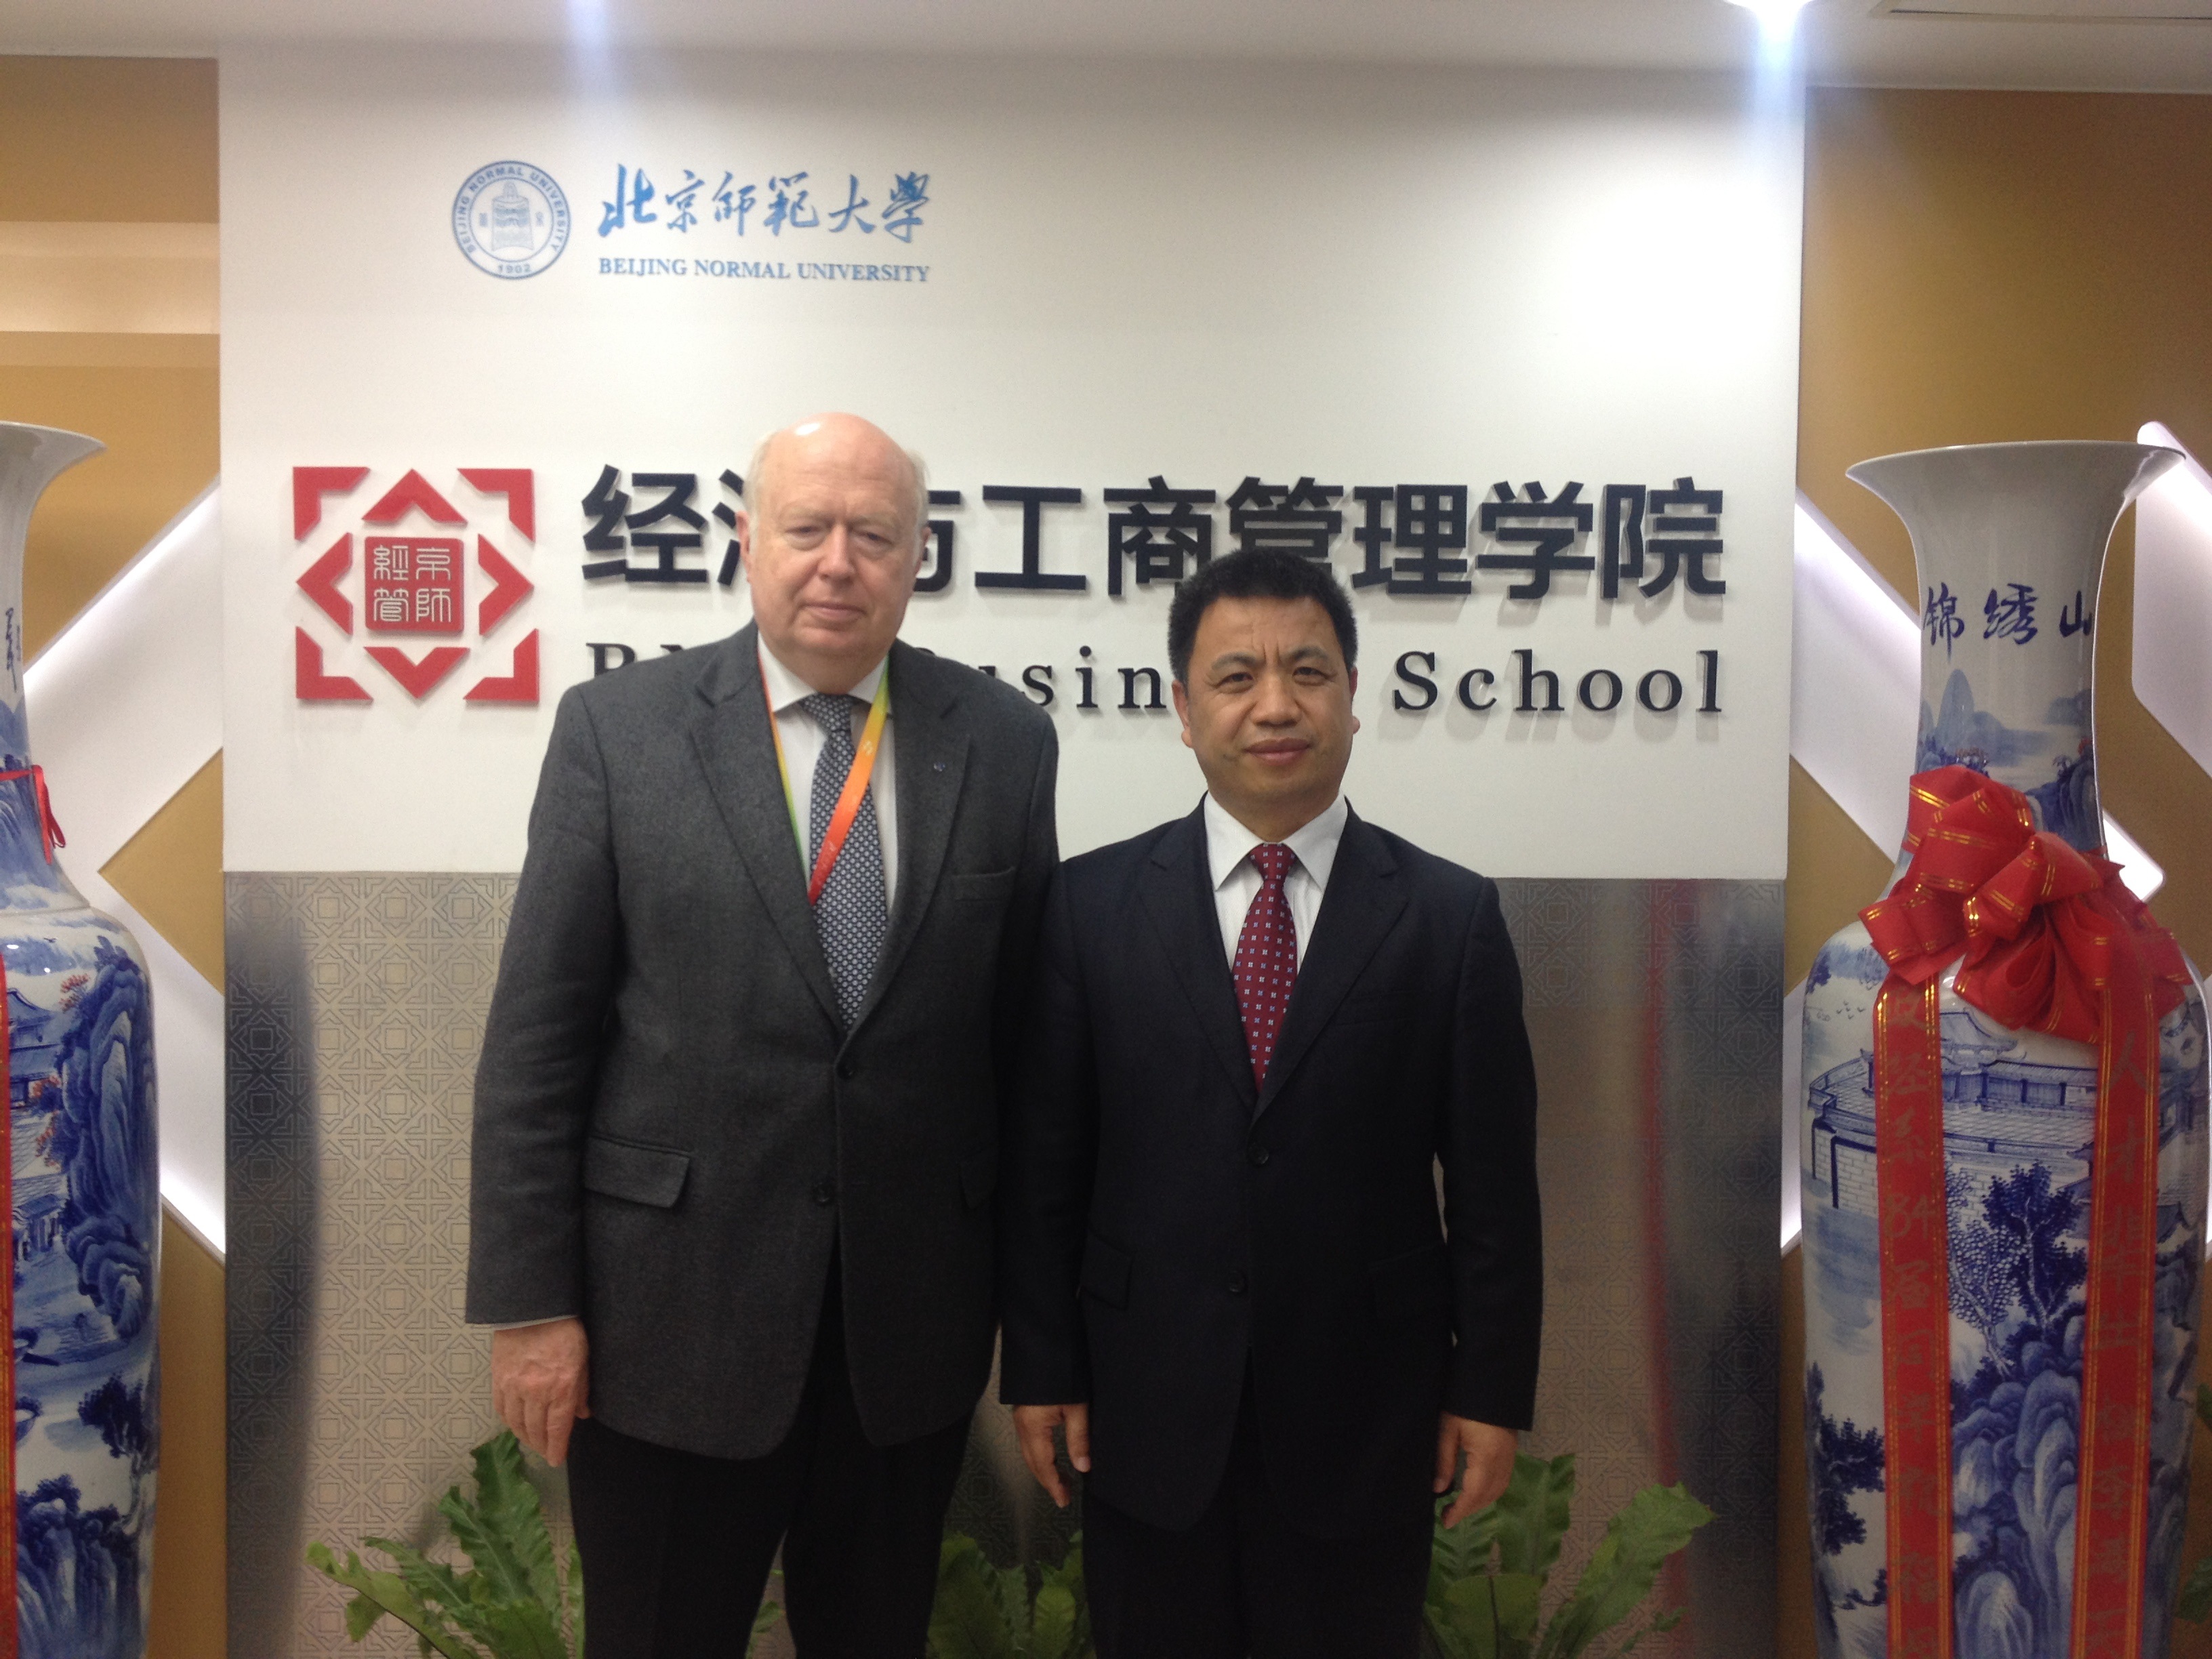 Nikolay Filinov (Dean of HSE Faculty of Business and Management) and Lai Desheng (Dean of the School of Economics and Business Administration at Beijing Normal University)